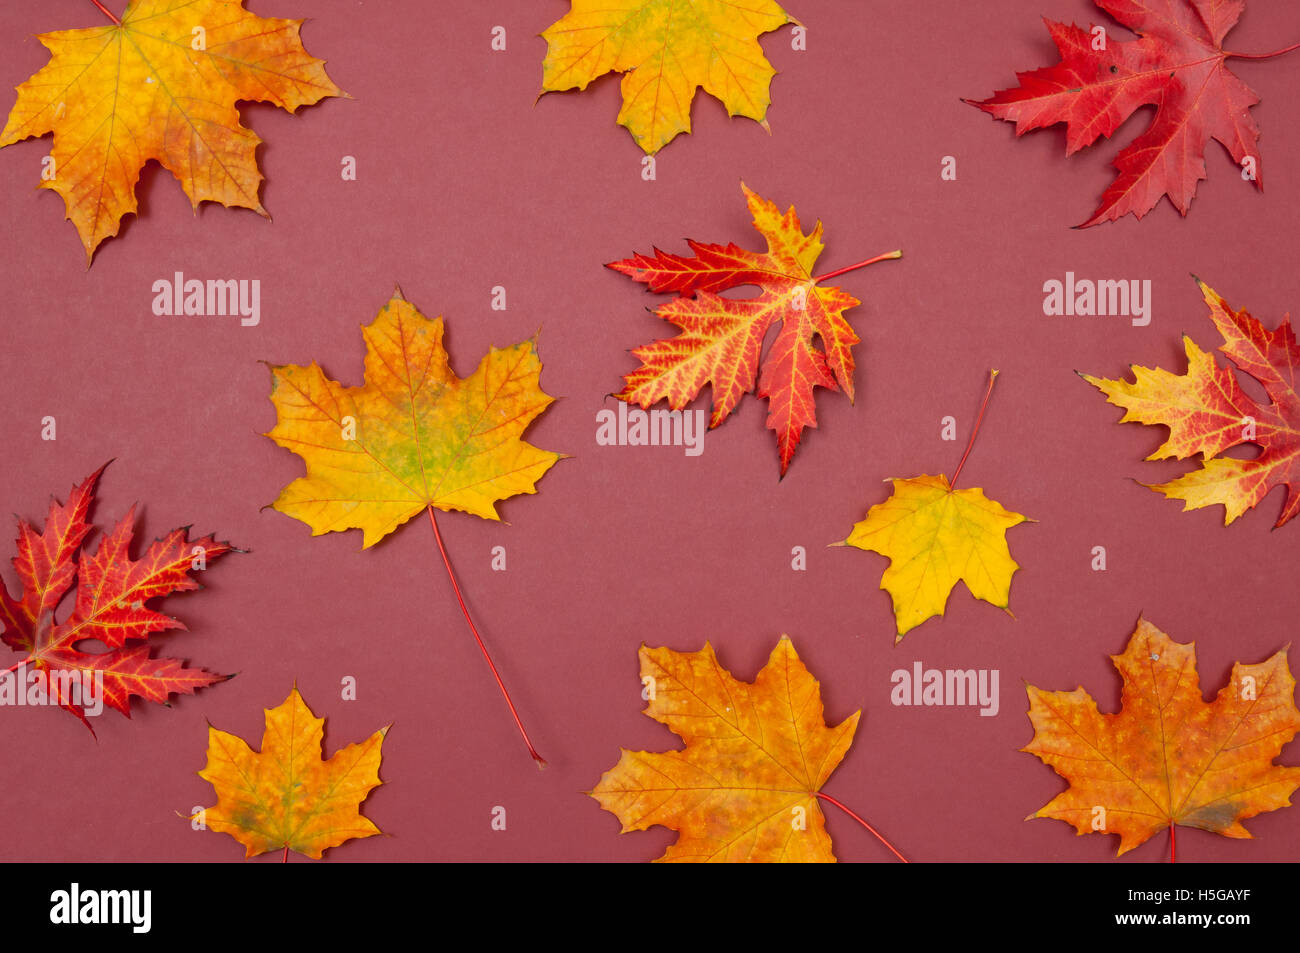 Pattern of colorful fallen autumn maple leaves on claret background Stock Photo